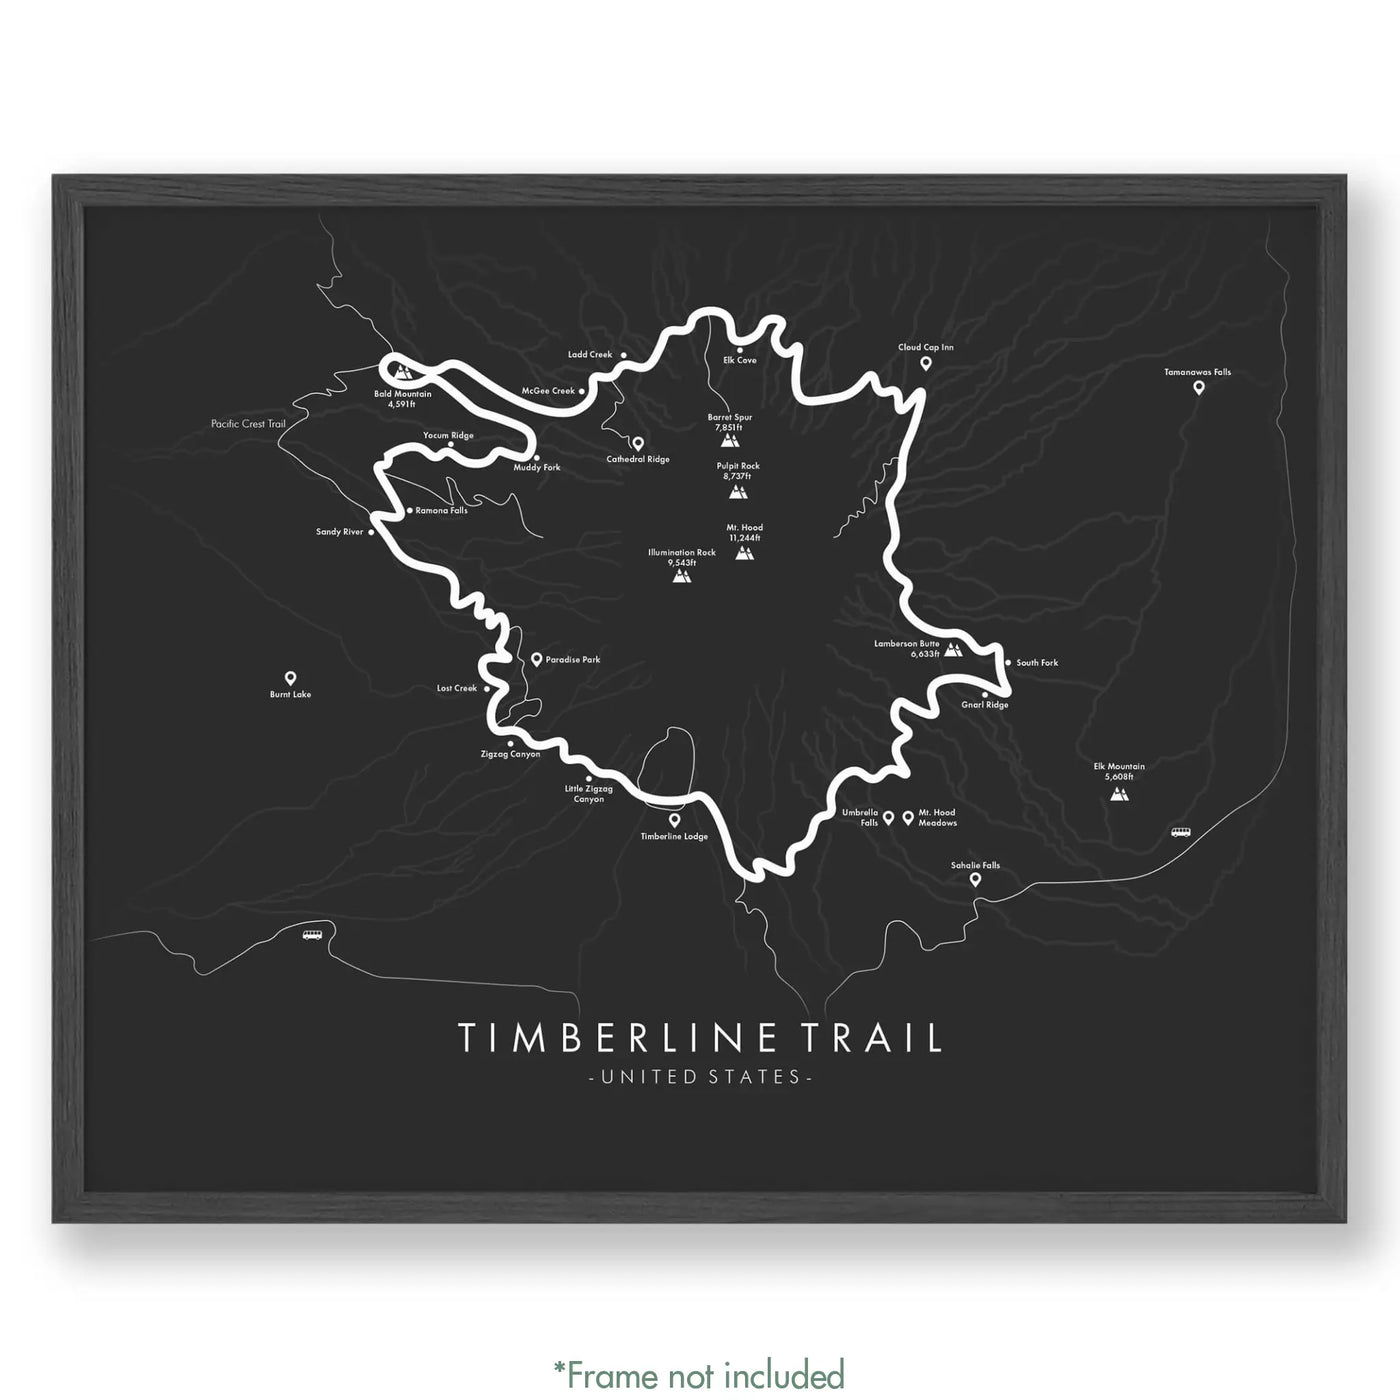 Trail Poster of Timberline Trail - Grey